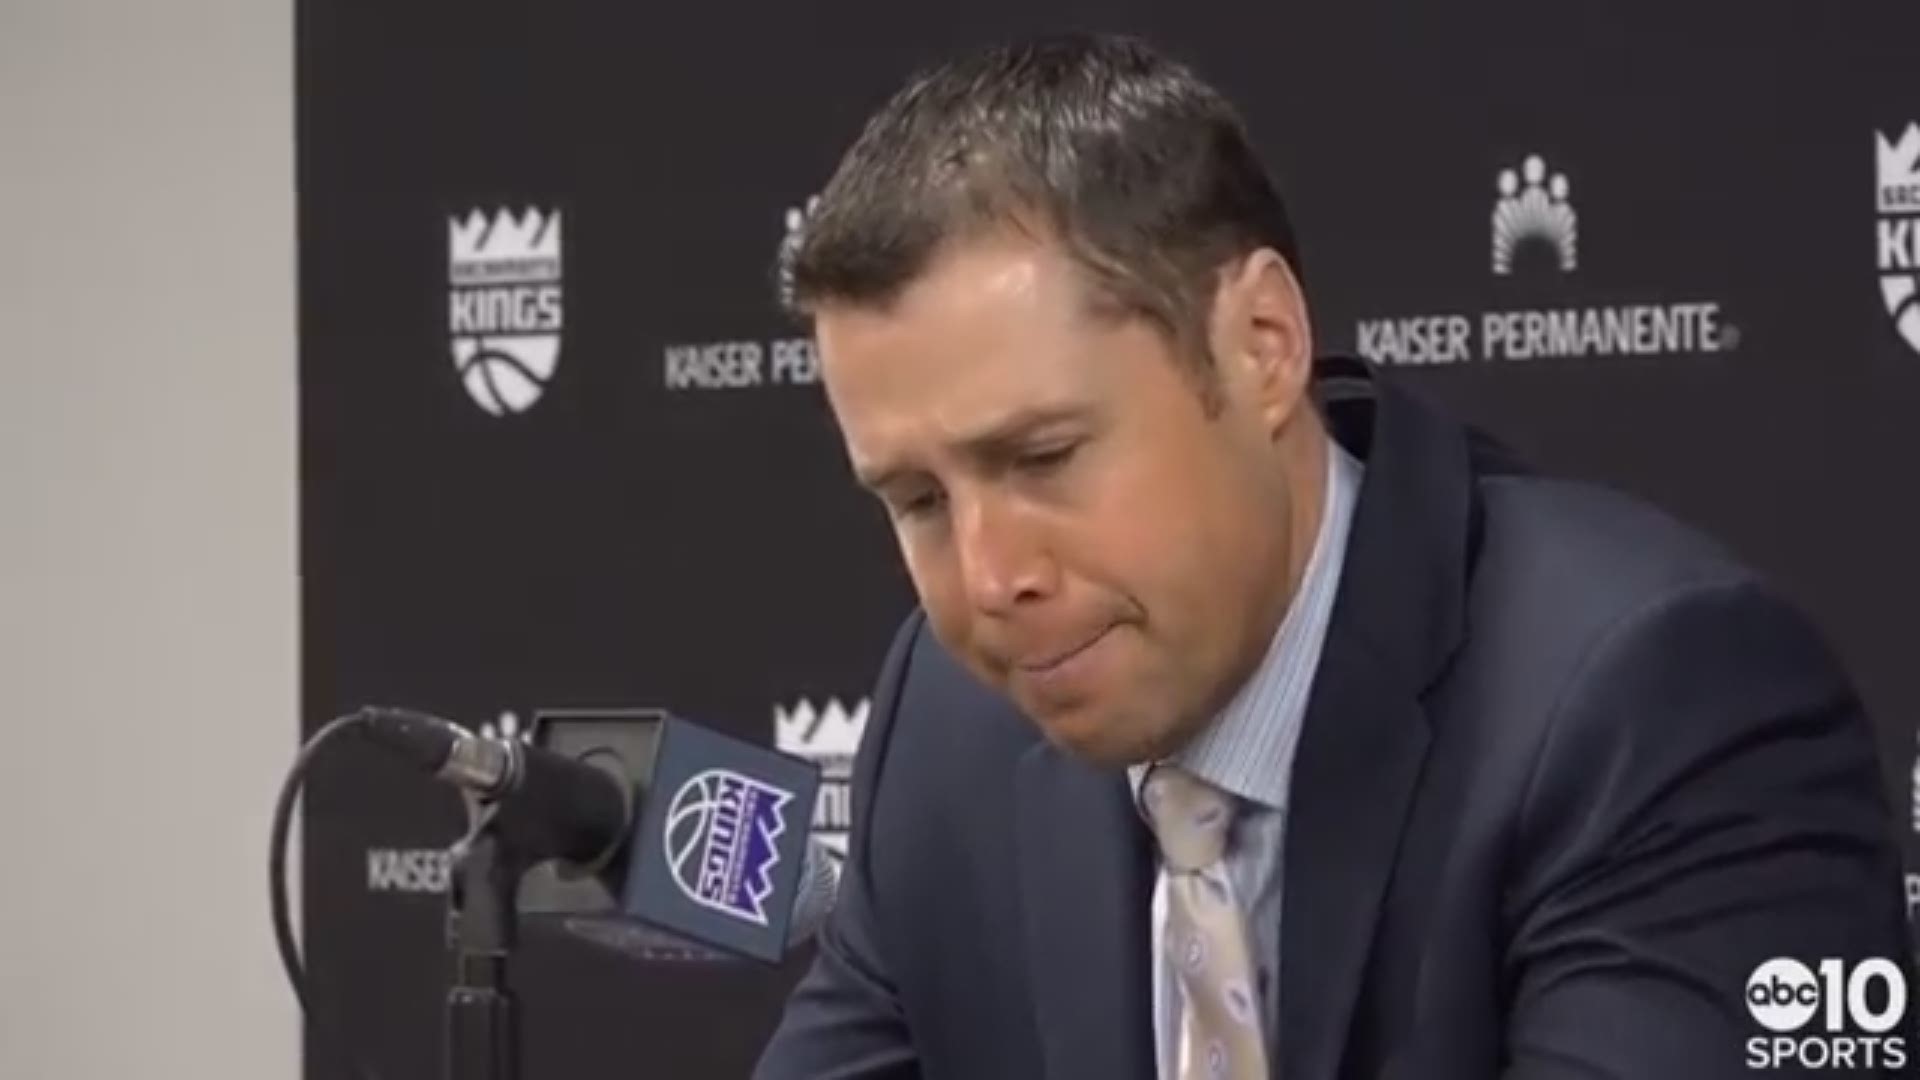 Kings head coach Dave Joerger talks about Sunday's win over the Phoenix Suns, the career-night for his rookie Marvin Bagley III, figuring out the new pieces to his rotations following the three trades made by Sacramento, and picking up their 30th win before the All-Star break.